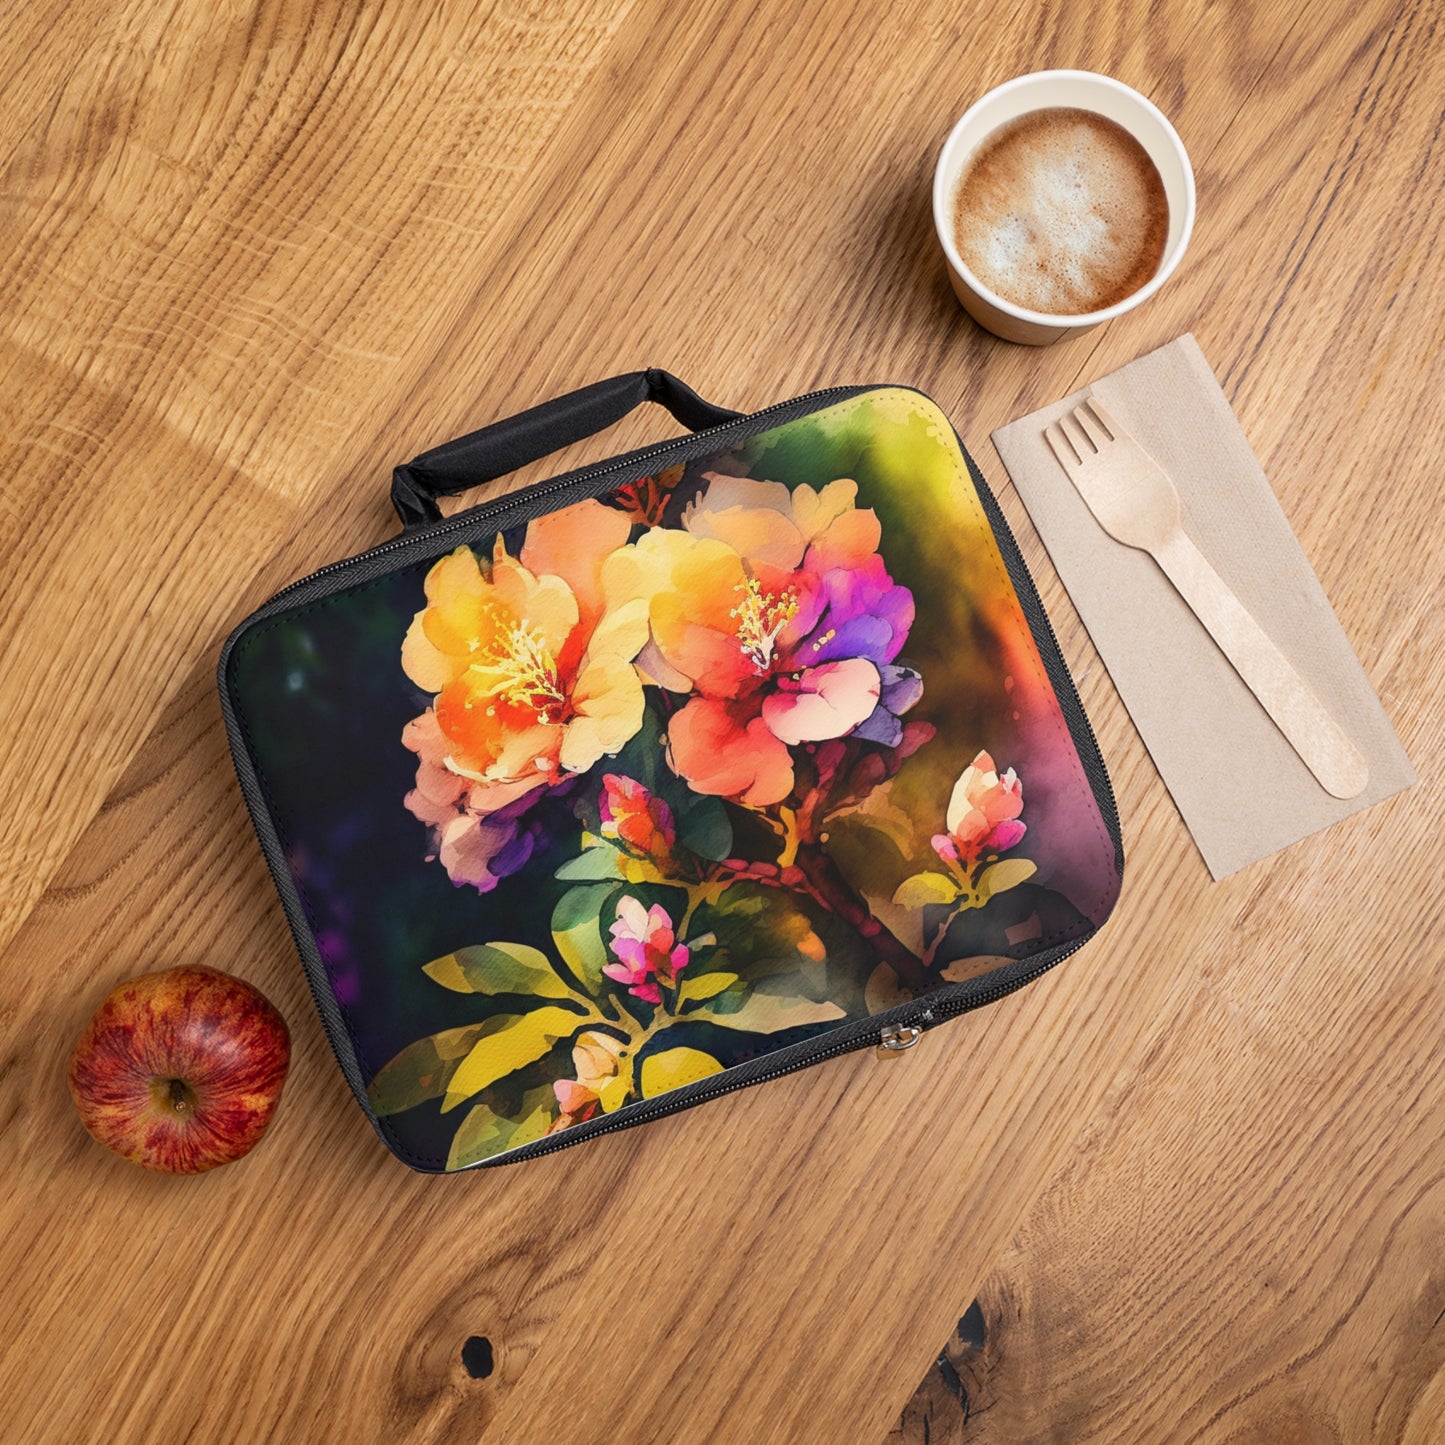 Lunch Bag Bright Spring Flowers 2